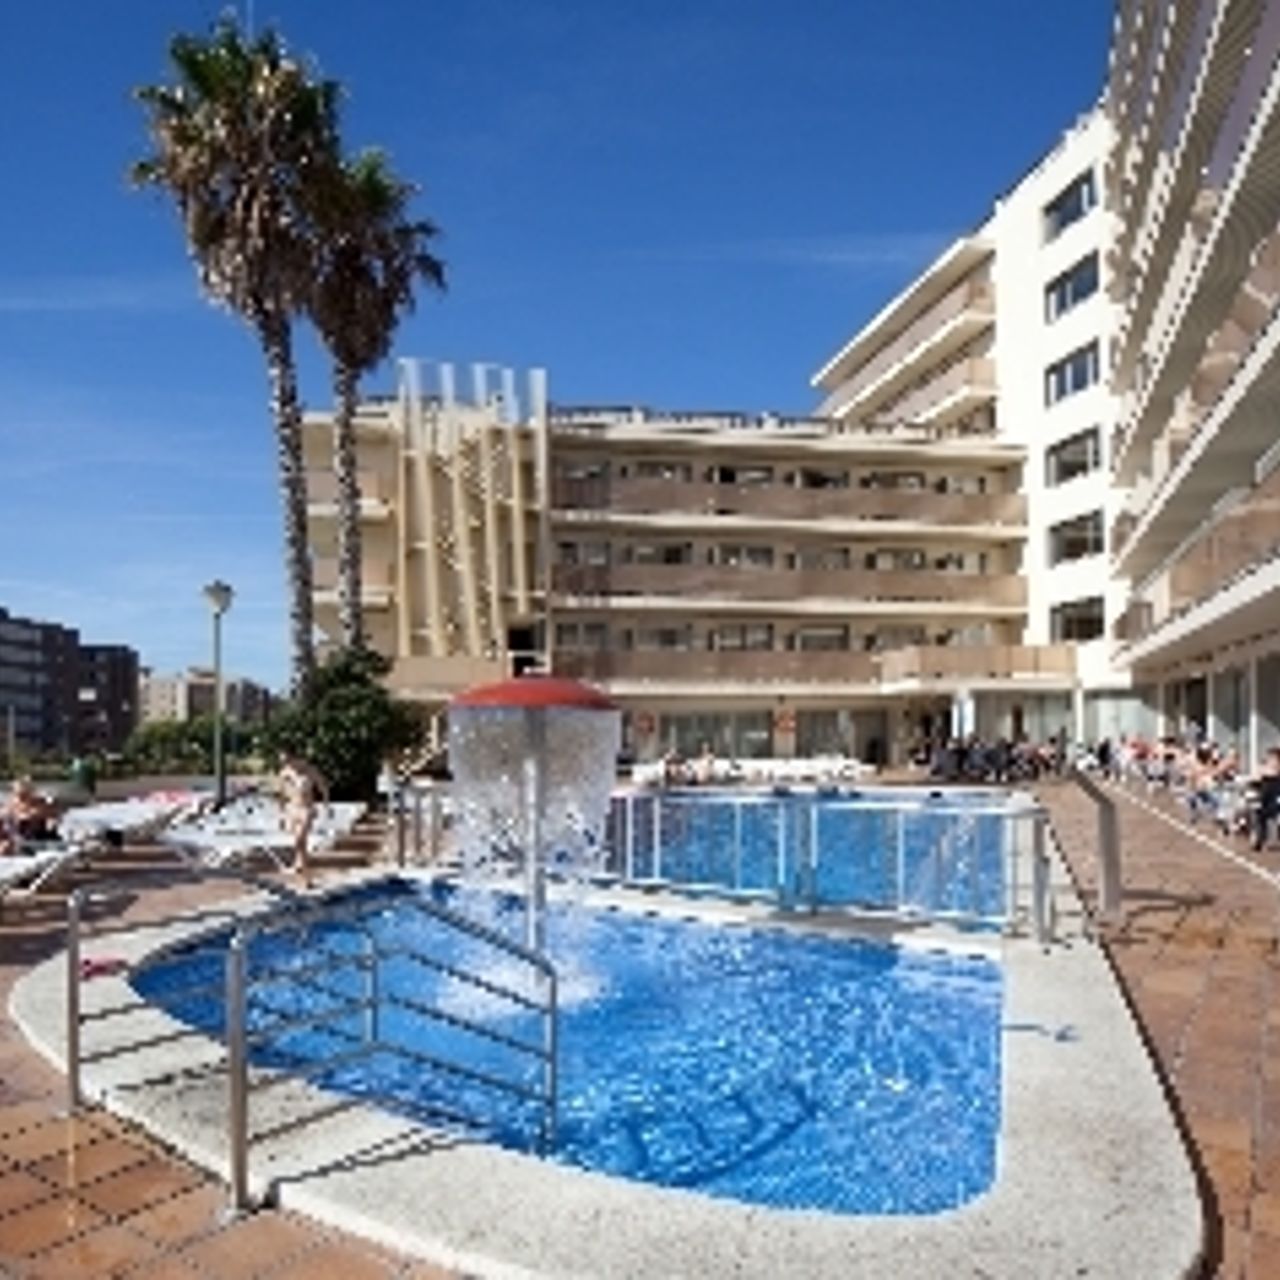 Hotel H TOP Royal Star - Lloret de Mar - Great prices at HOTEL INFO